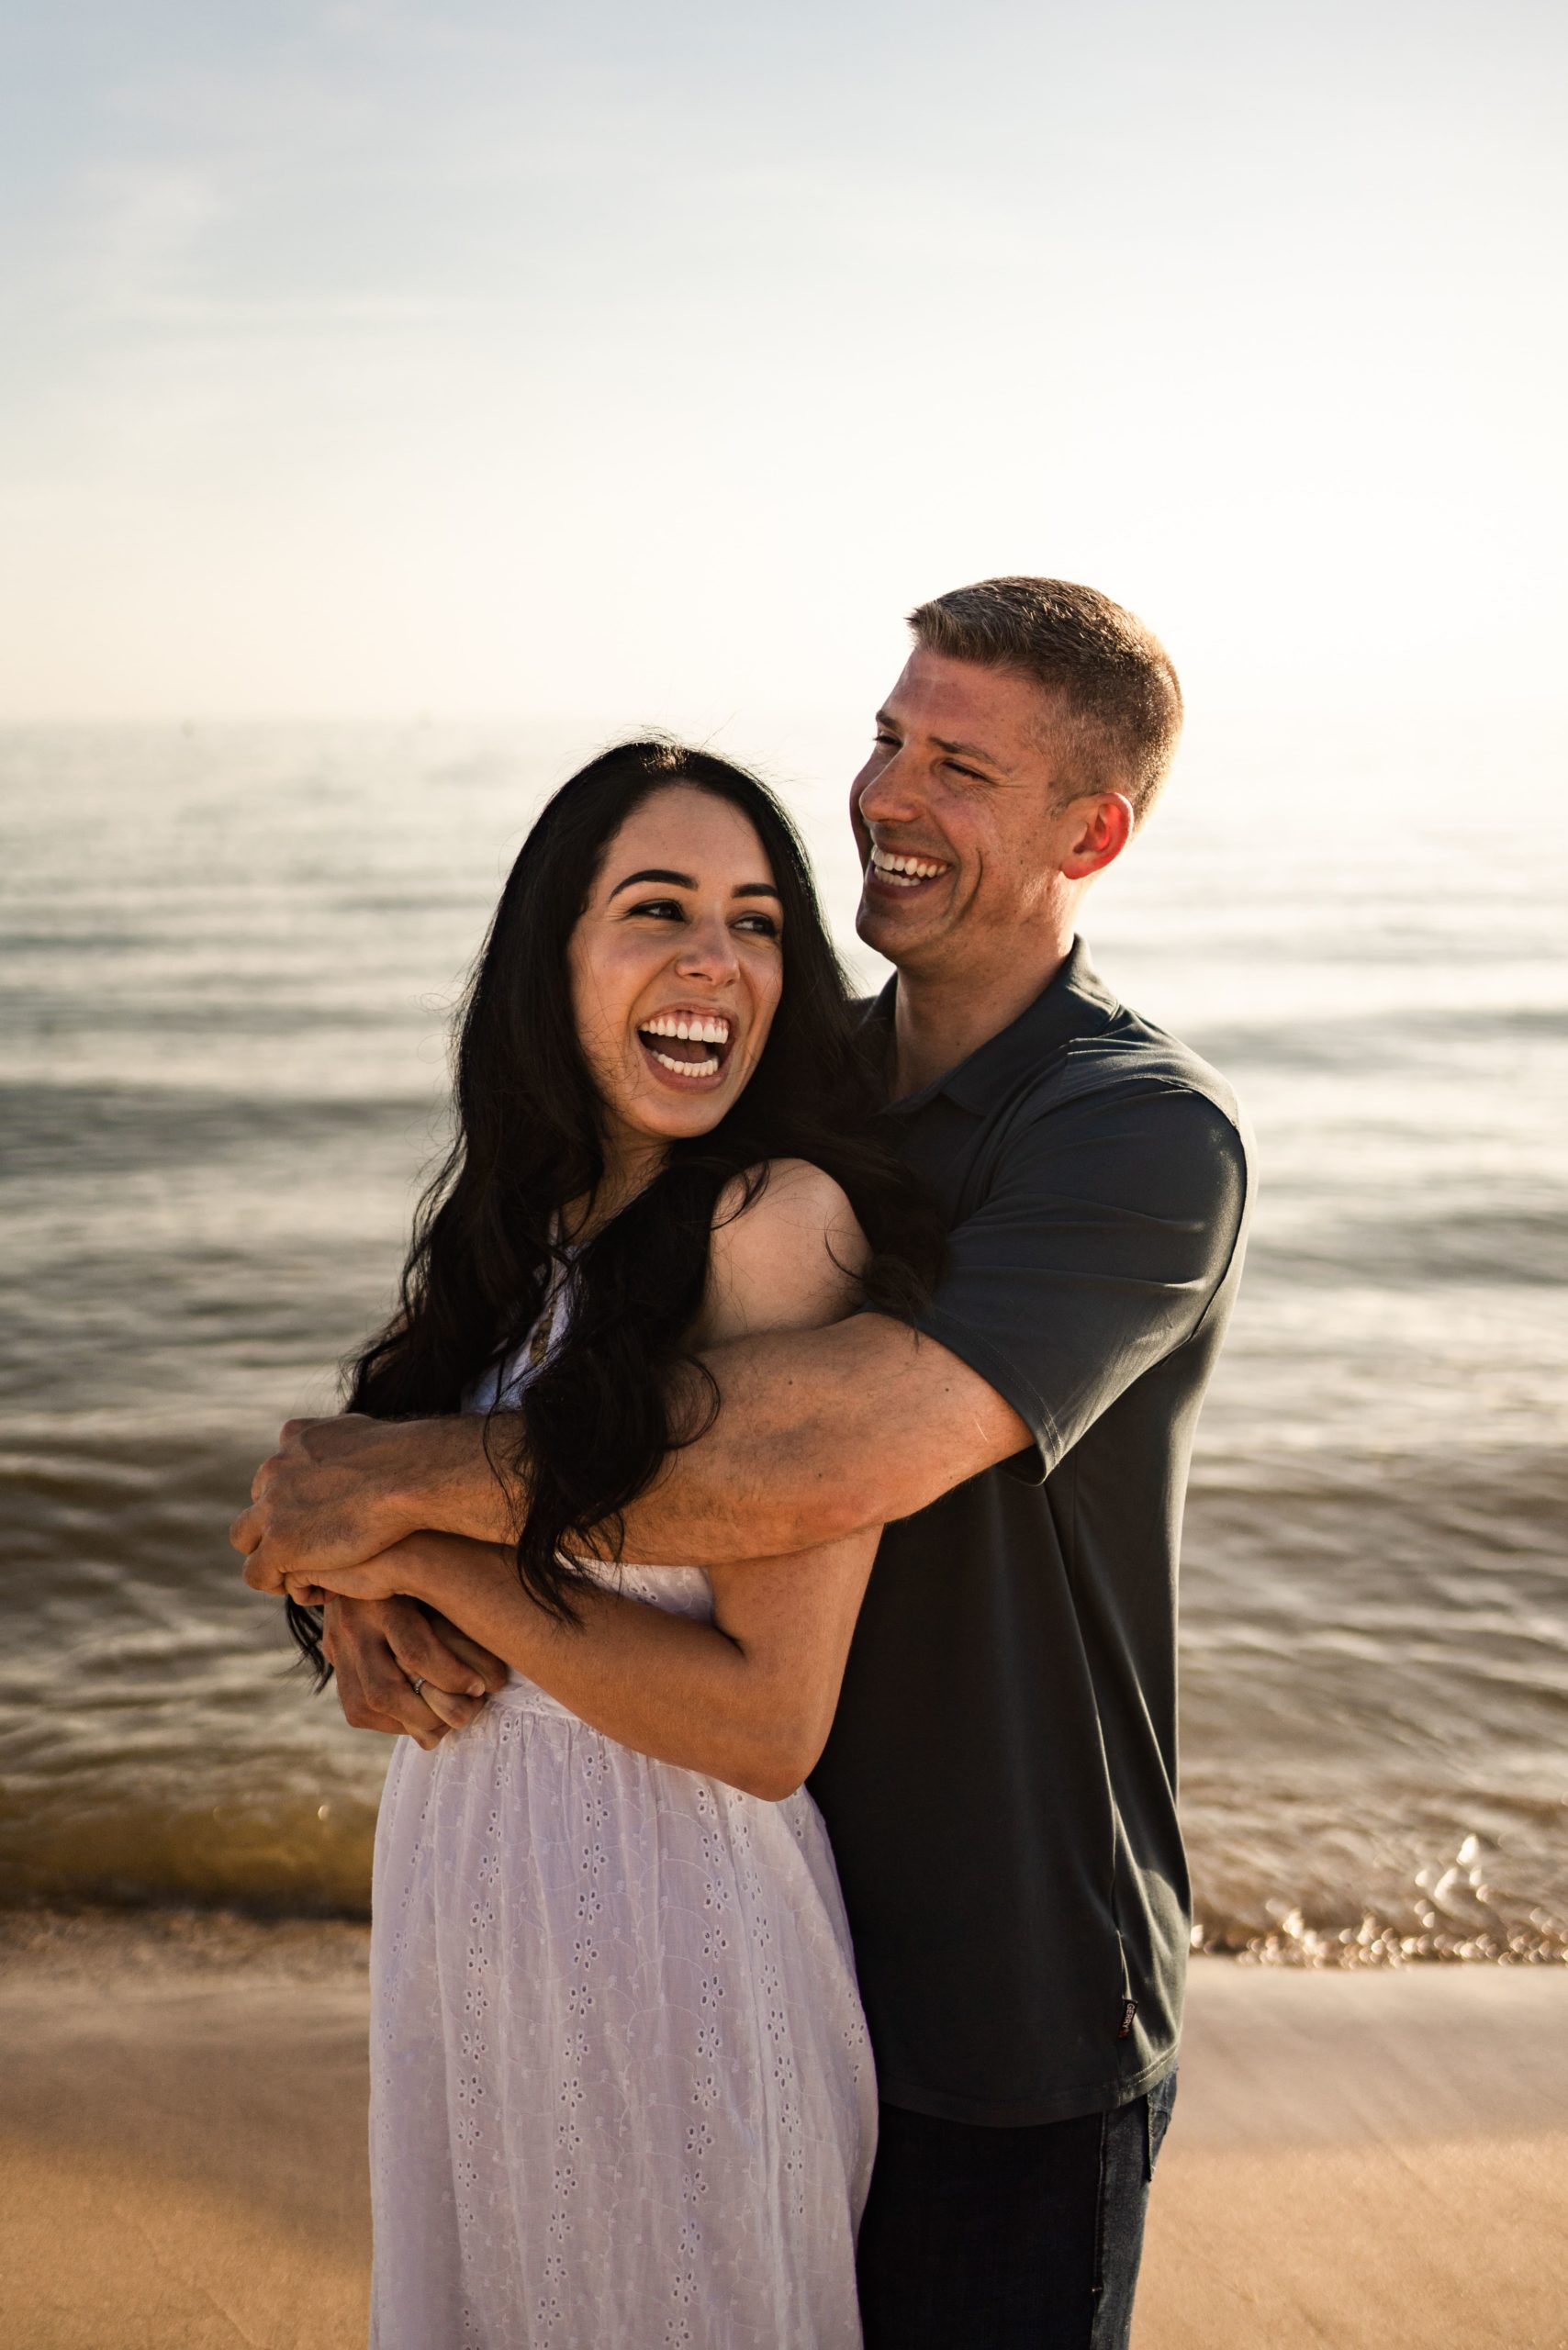 an engaged couple with wide smiles stand on the shore his arms wrapped around her during their engagement photoshoot beach